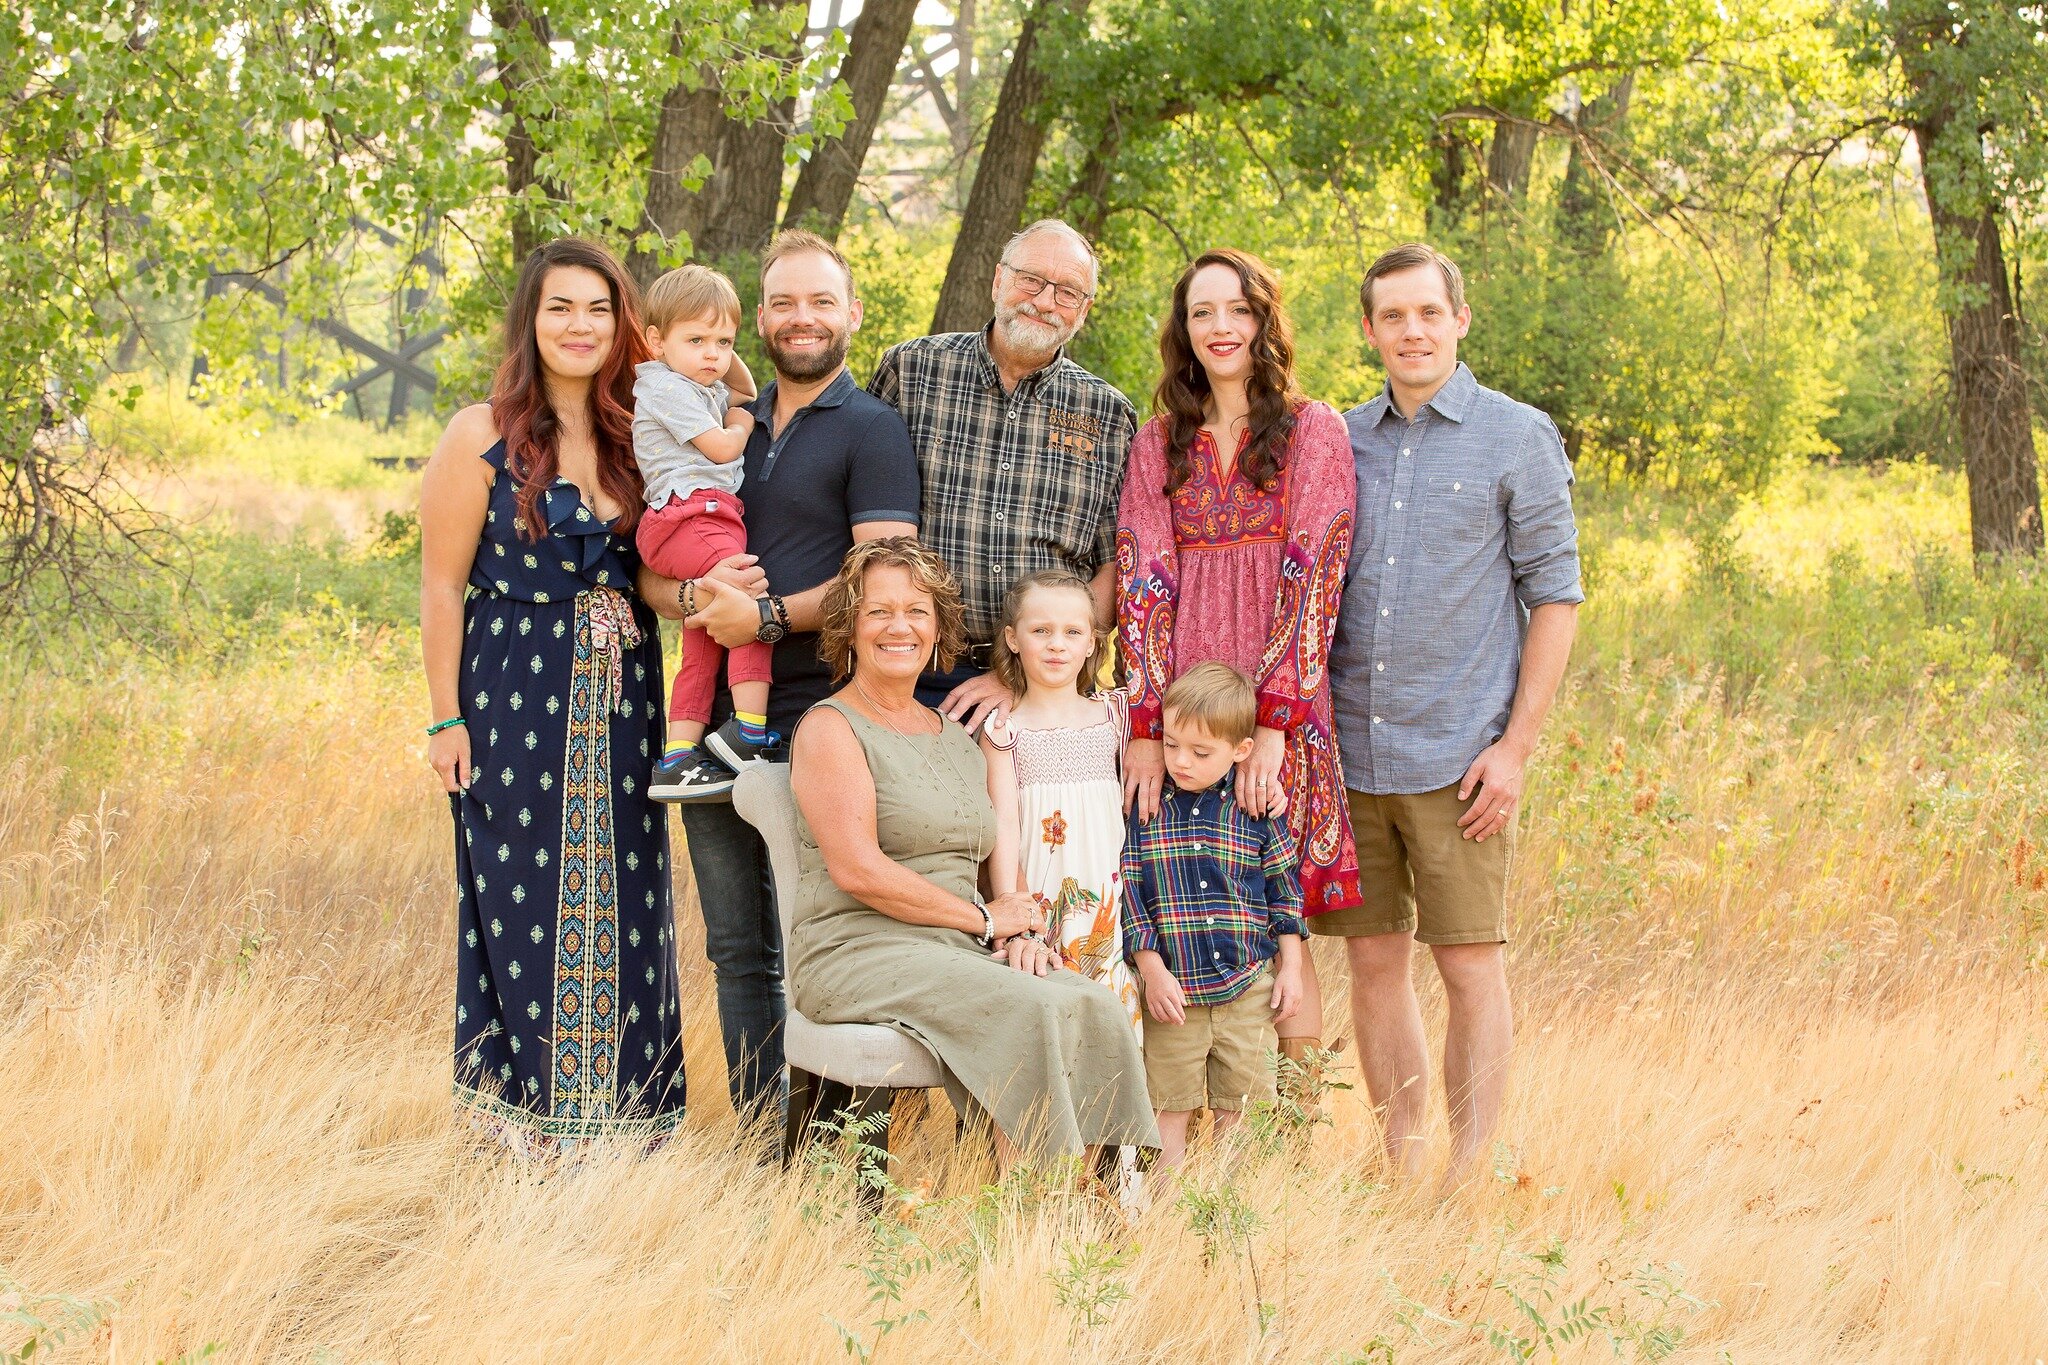 Extended Family Photos can be an annual tradition and create some fun memories. It can be difficult to coordinate everyone's schedules so plan now and book early!

#lethbridgefamilyphotographer #outdoorportraits #extendedfamily #summerphotos